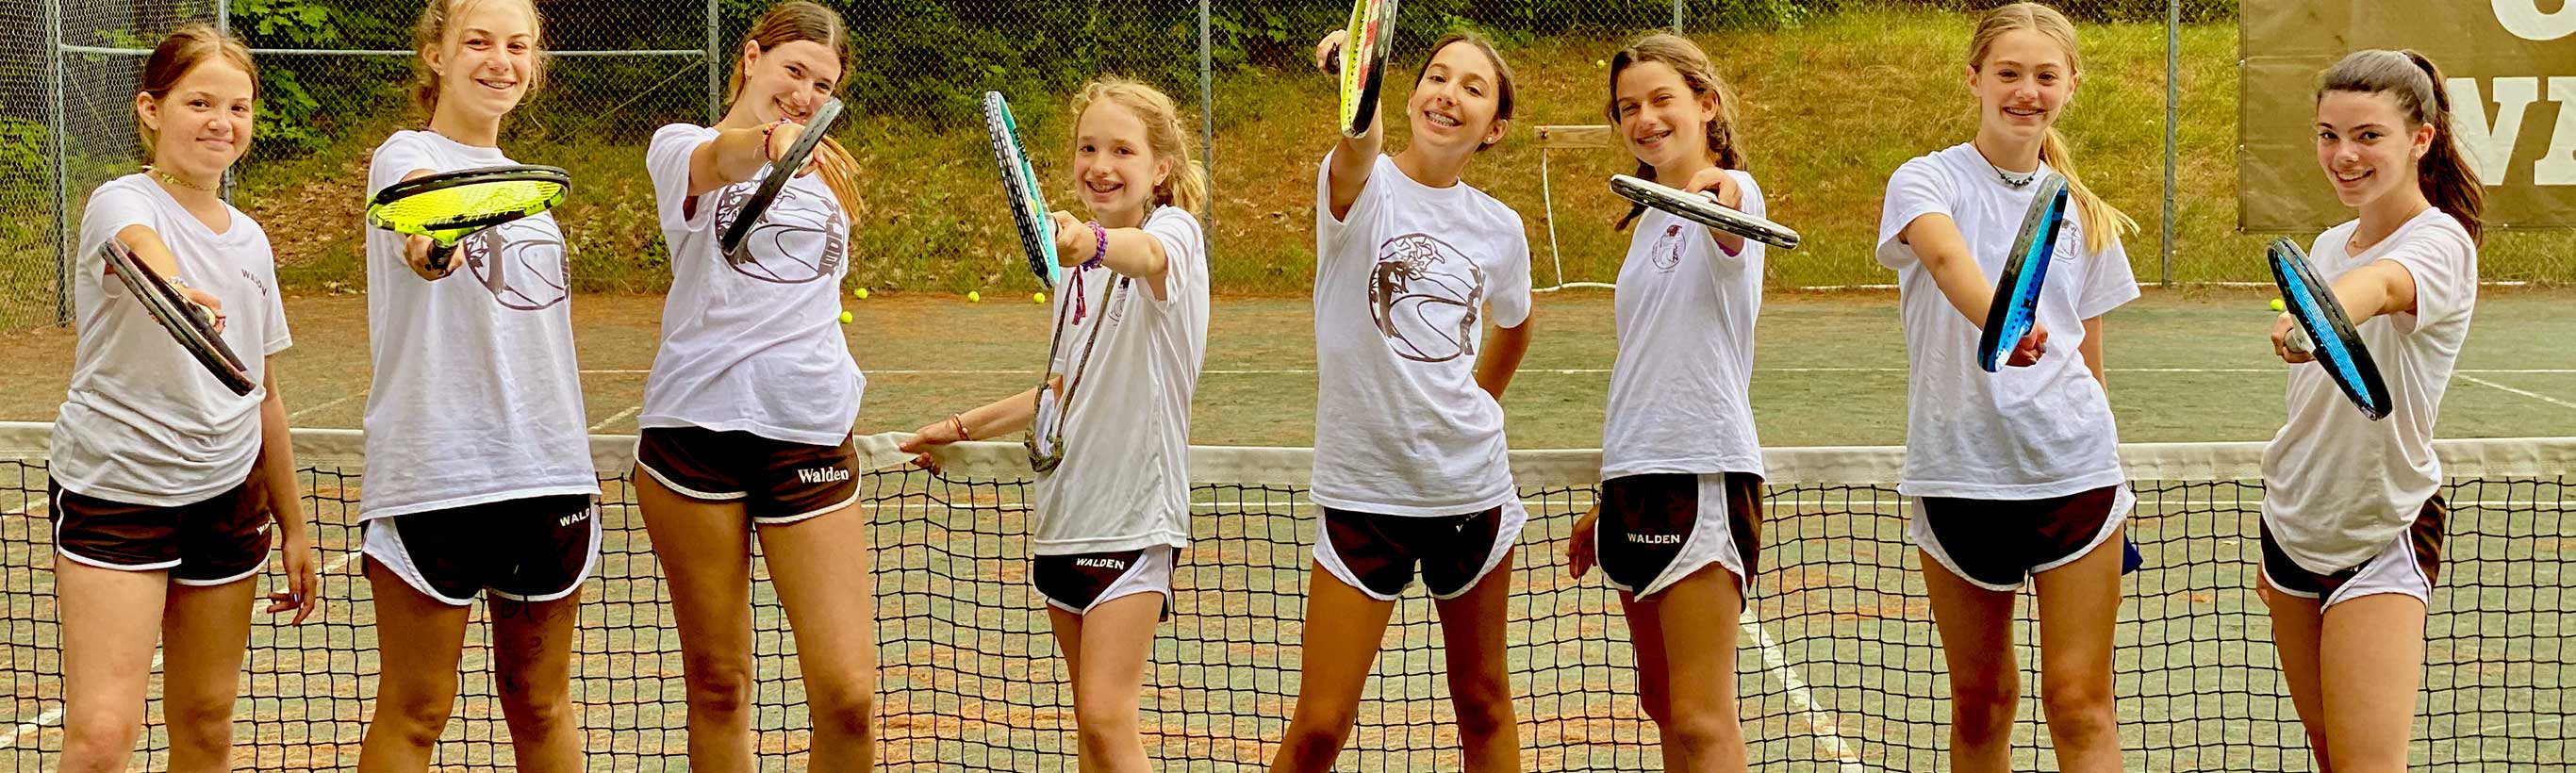 A group of girls on the tennis court pose with their rackets.